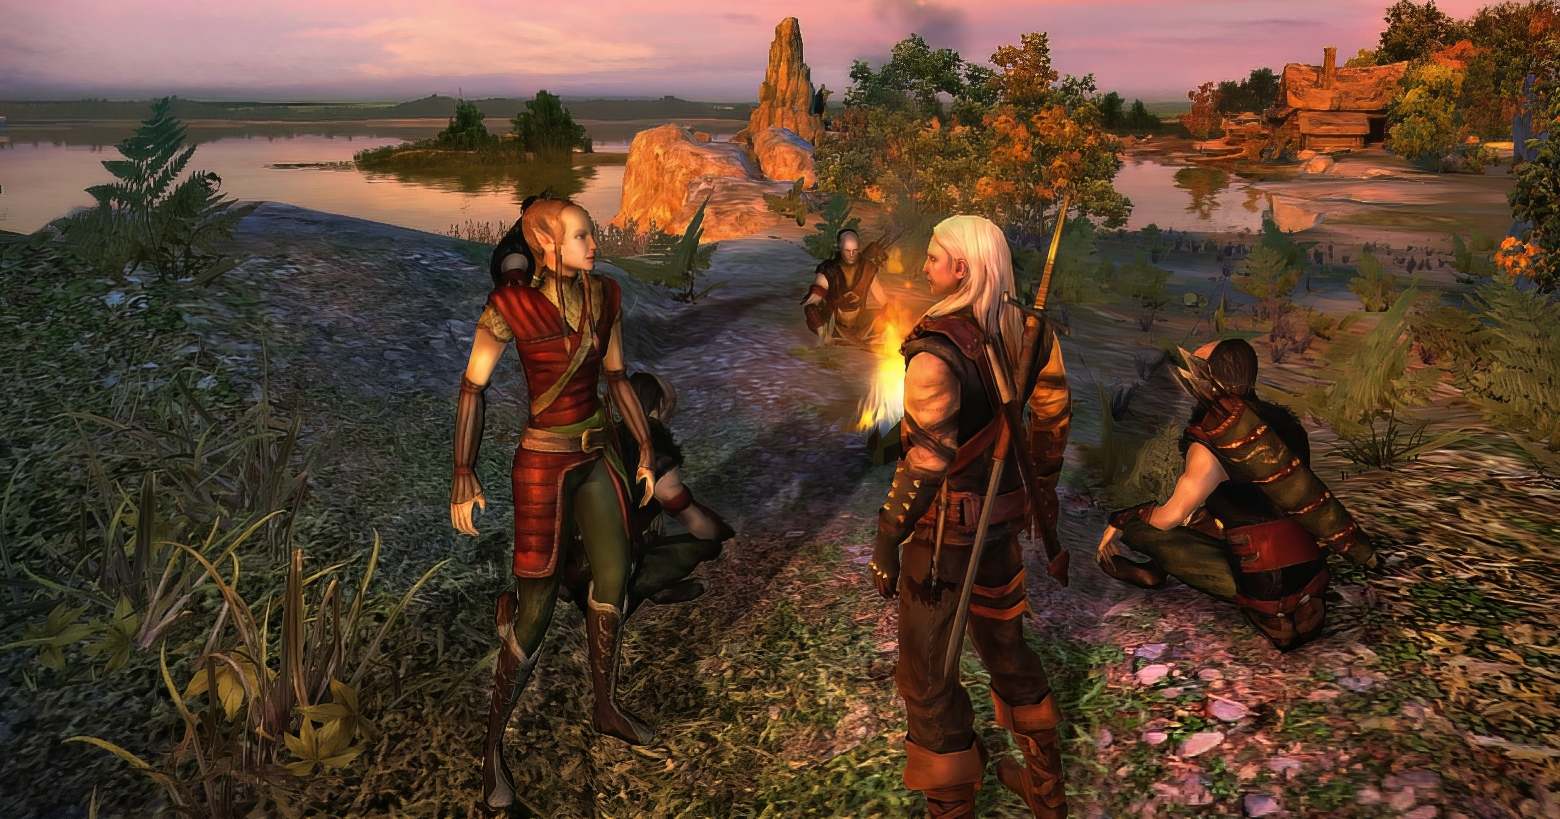 In this screenshot of the first installment, we are looking at a grass-covered rocky coast slightly from above. The dusk bathes the scene in a warm orange tone. A large lake is depicted in the background and a brown, large wooden house stands in the right background. In the foreground, we see Gerald in the third person in a long shot, standing at a campfire with three other characters.